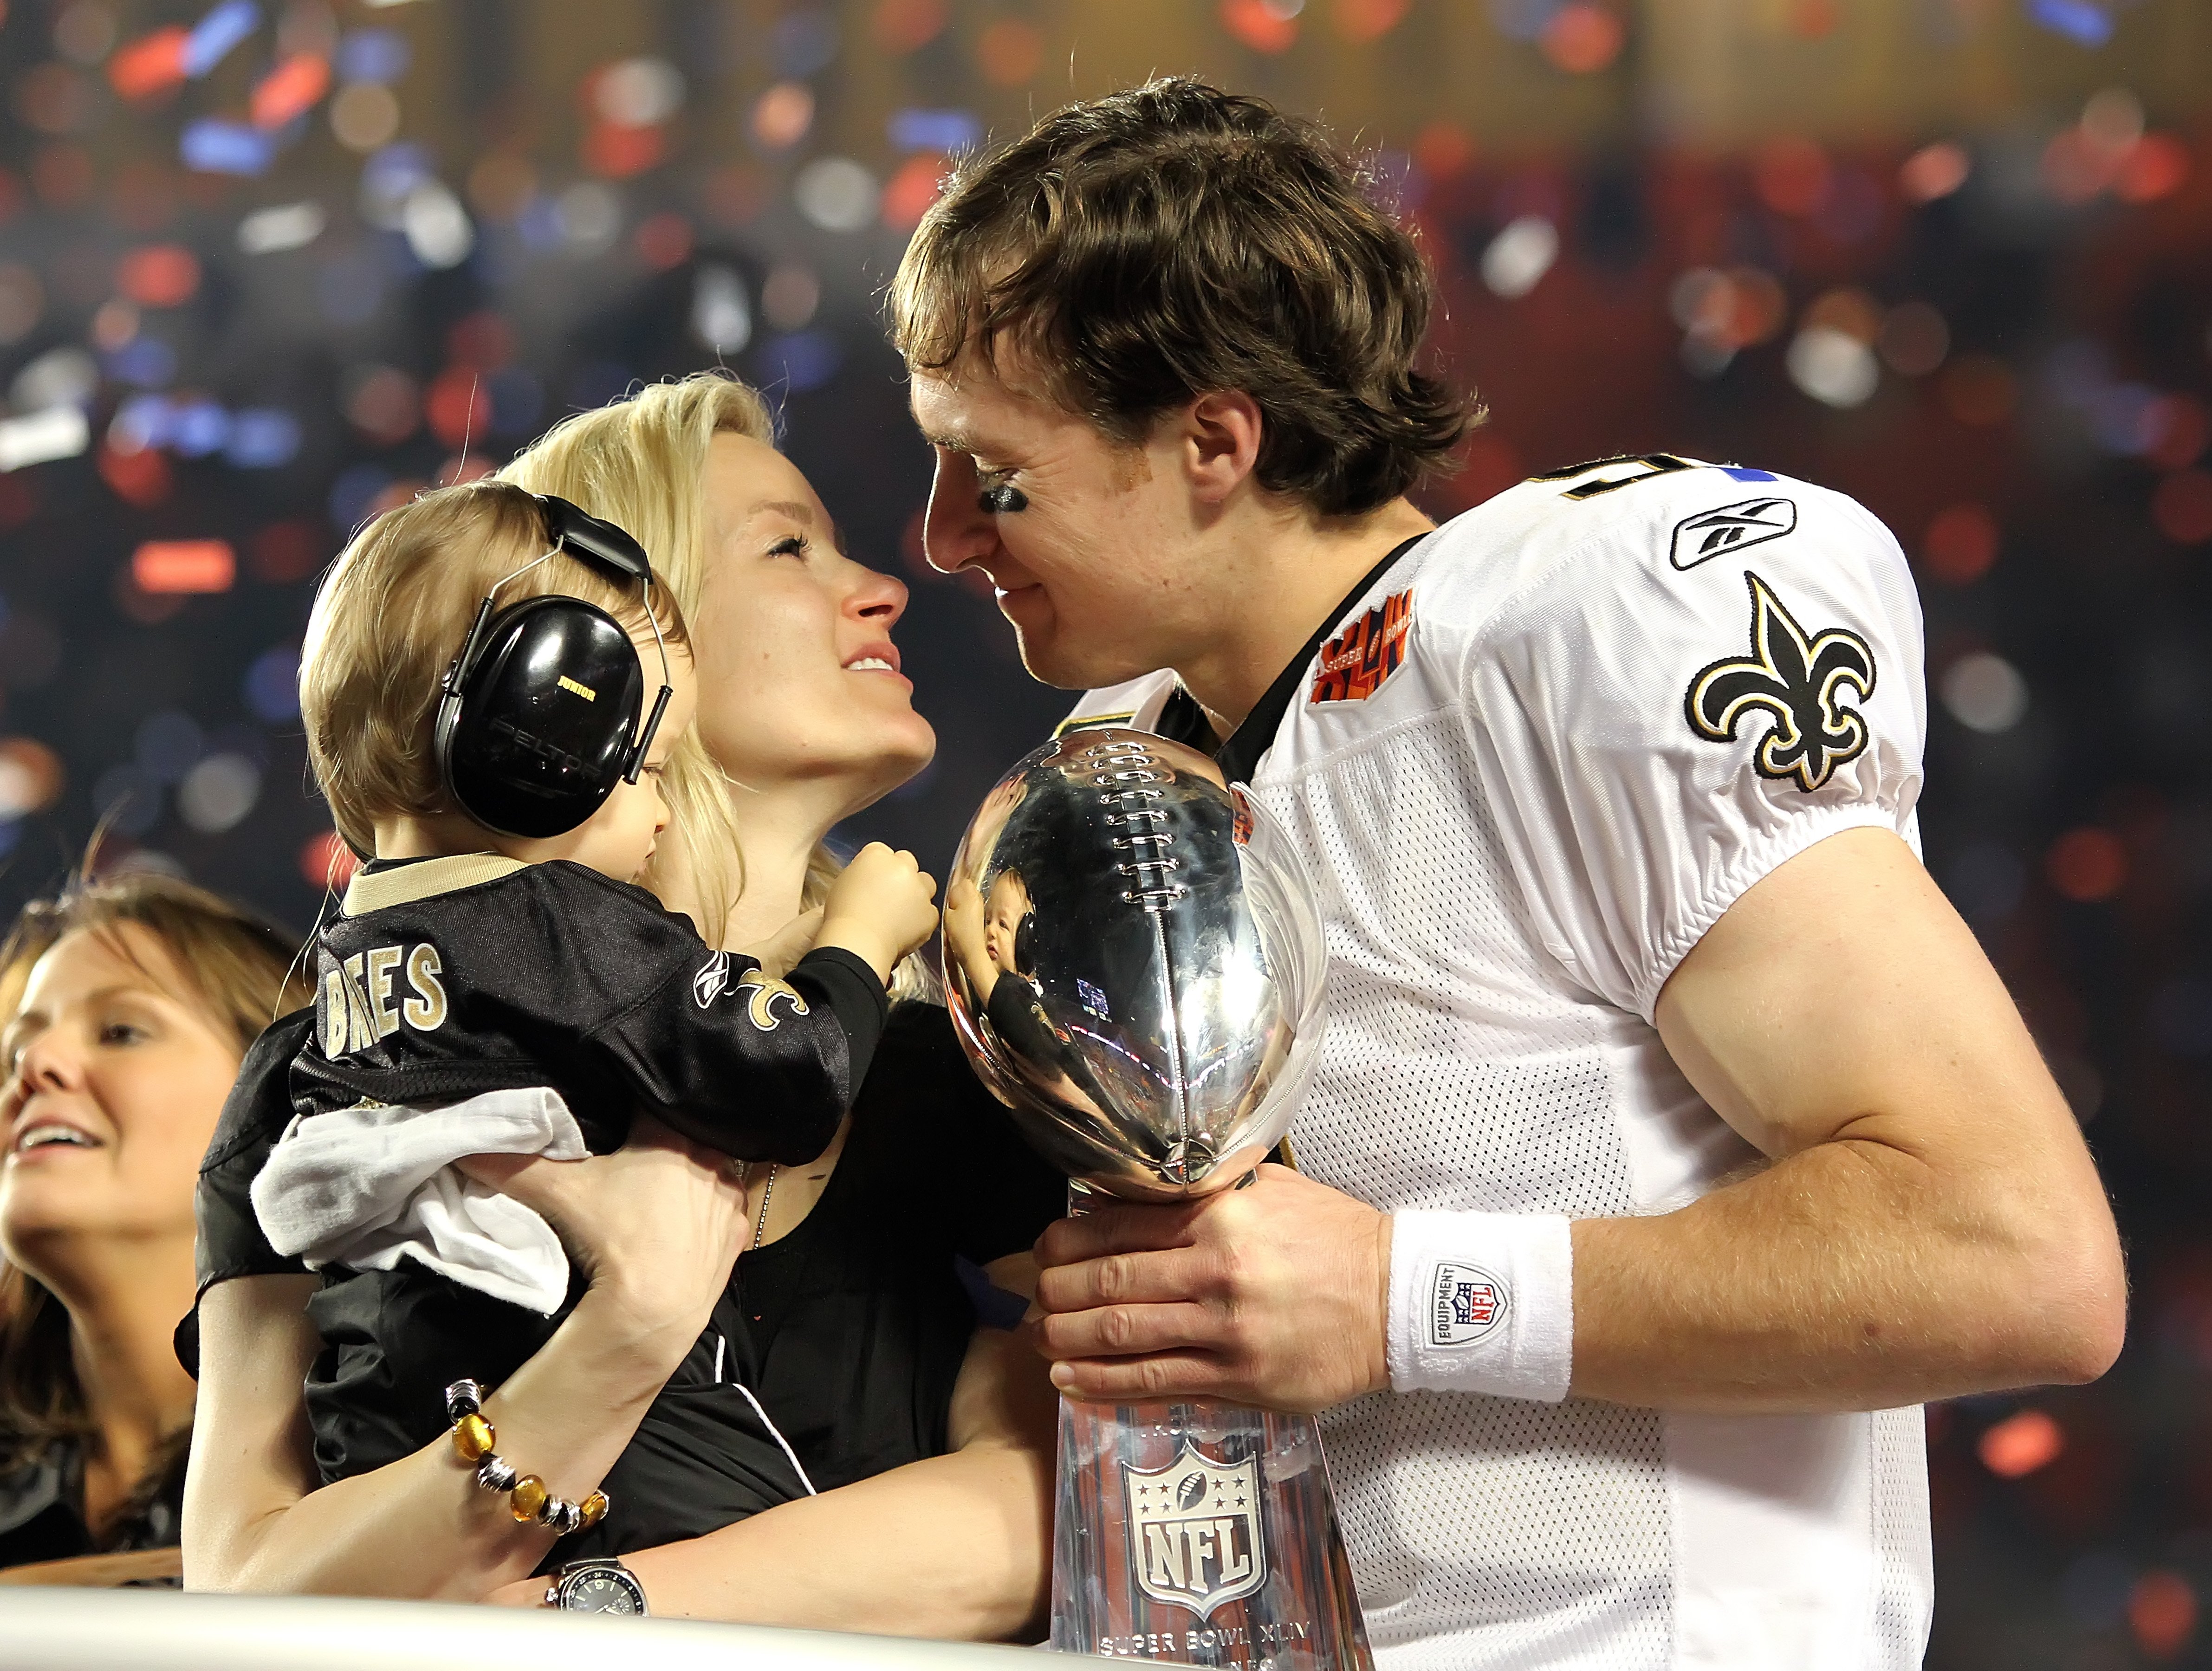 New Orleans Saints quarterback Drew Brees celebrates with his wife, Brittany, and son, Baylen, as Colts quarterback Peyton Manning leaves the field as the New Orleans Saints beat the Indianapolis Colts 31-17, Sunday, February 7, 2010 in Super Bowl XLIV at Sun Life Stadium in Miami Gardens, Florida. | Source:  Getty Images